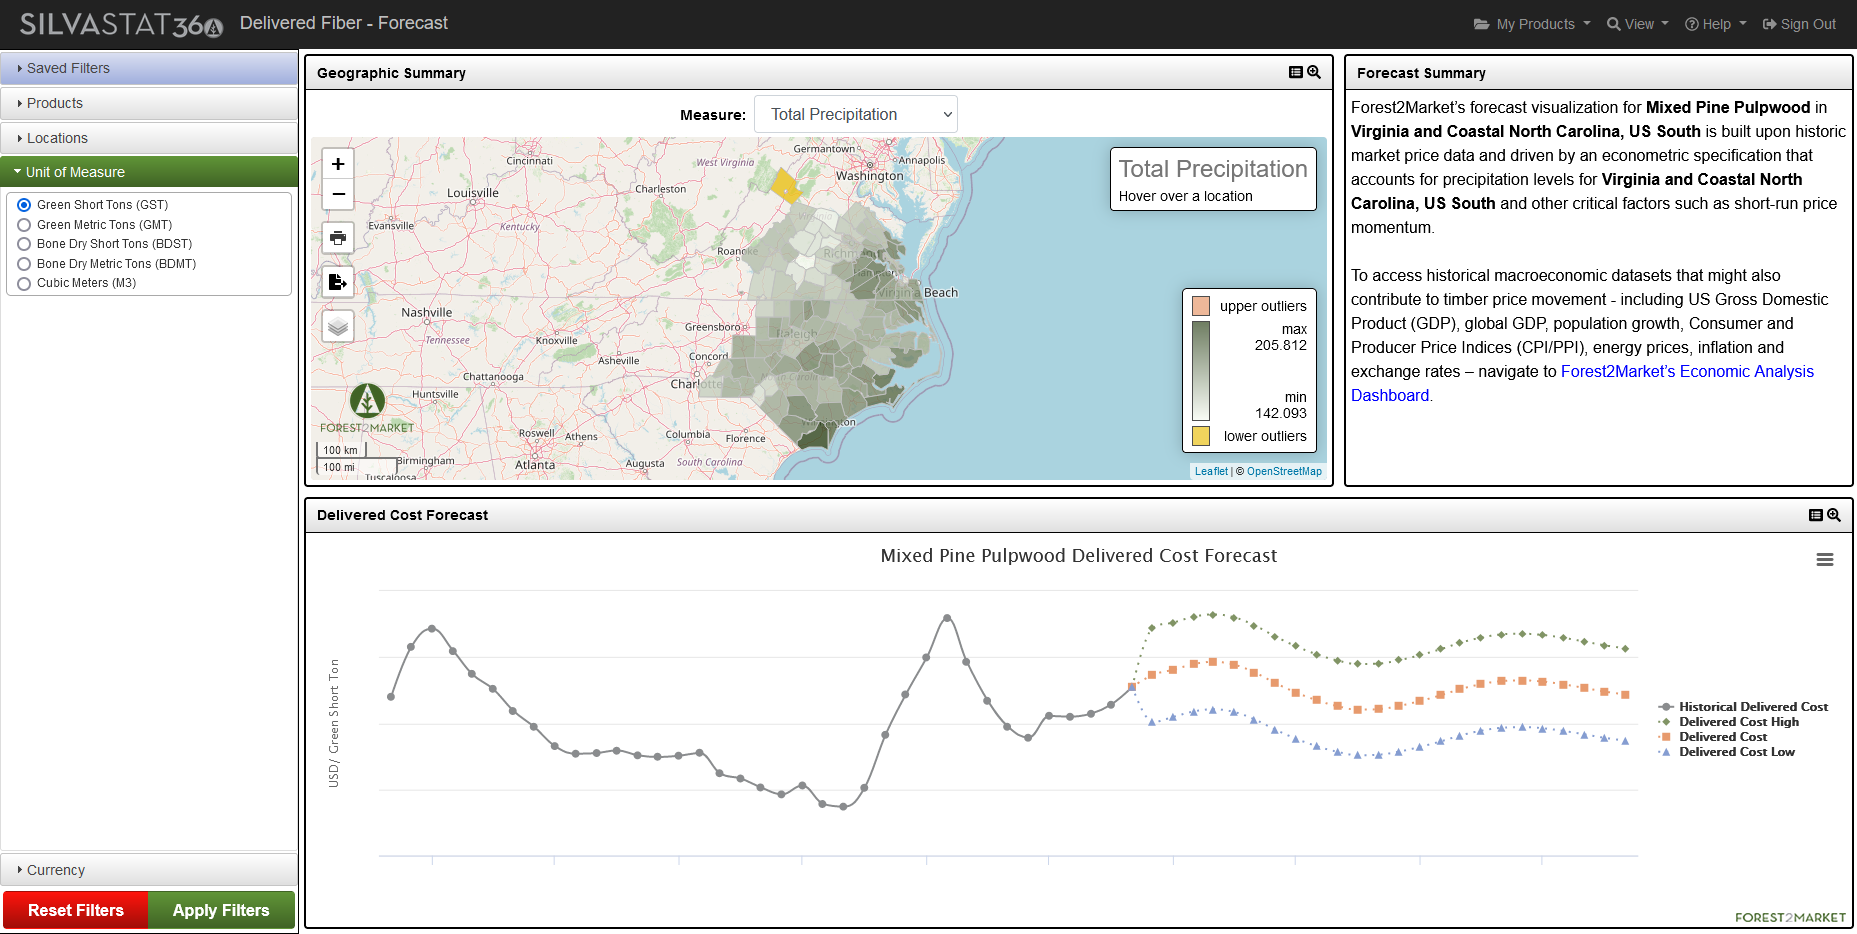 New Product Spotlight: SilvaStat360 Delivered Price Forecast Tool